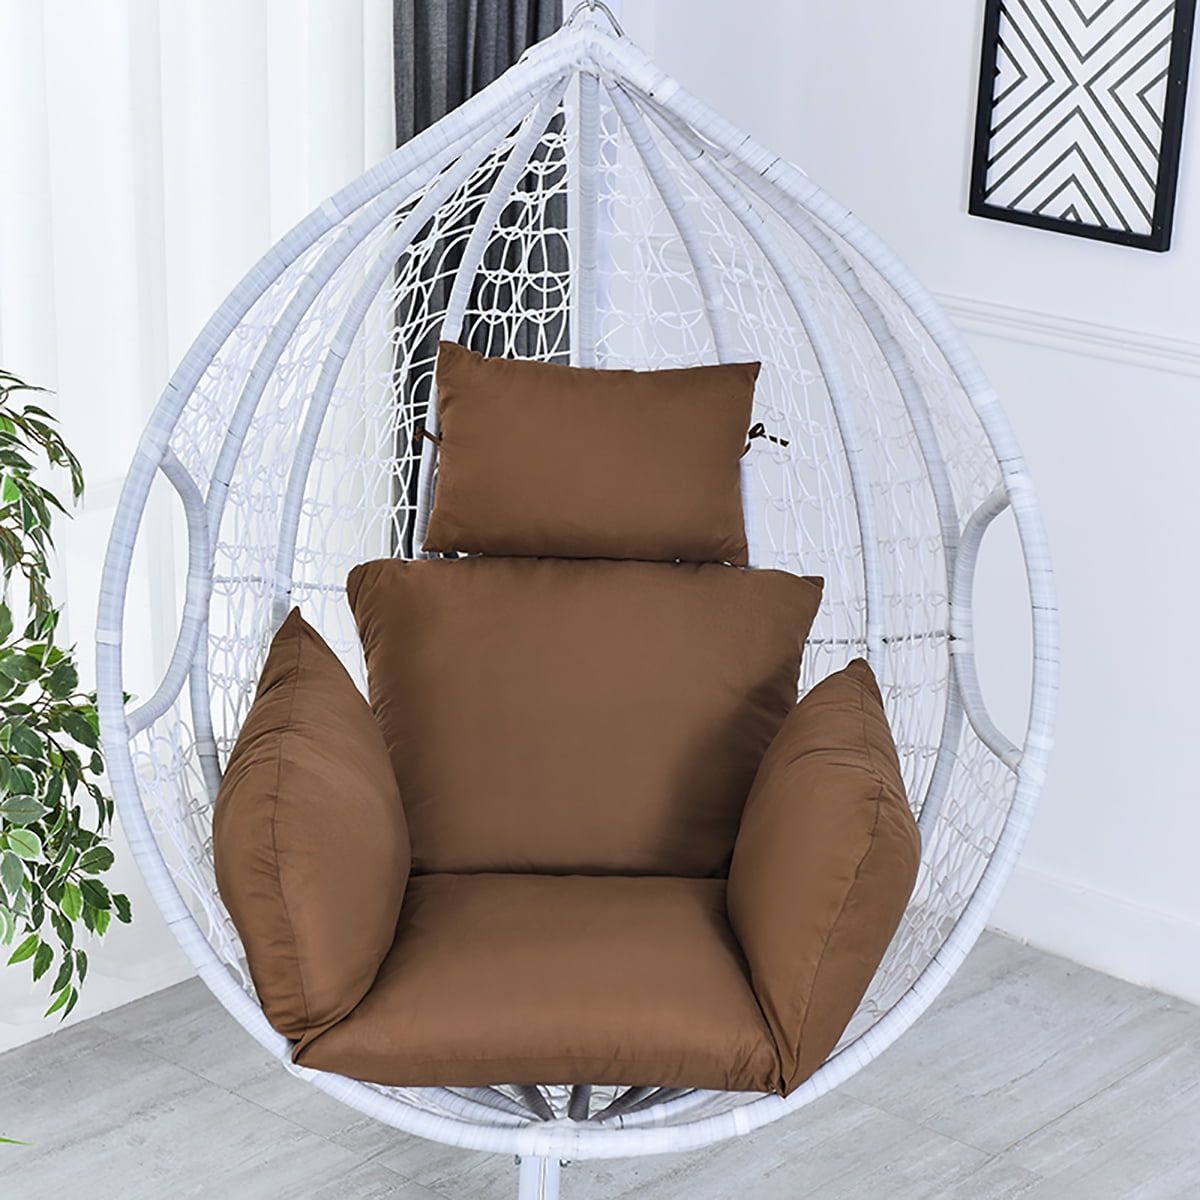 Outdoor Swing Chair Egg Chair Cushion Soft Cushion Hanging Swing Egg Chair Seat Pad Egg Swing Chair Cushion for Indoor